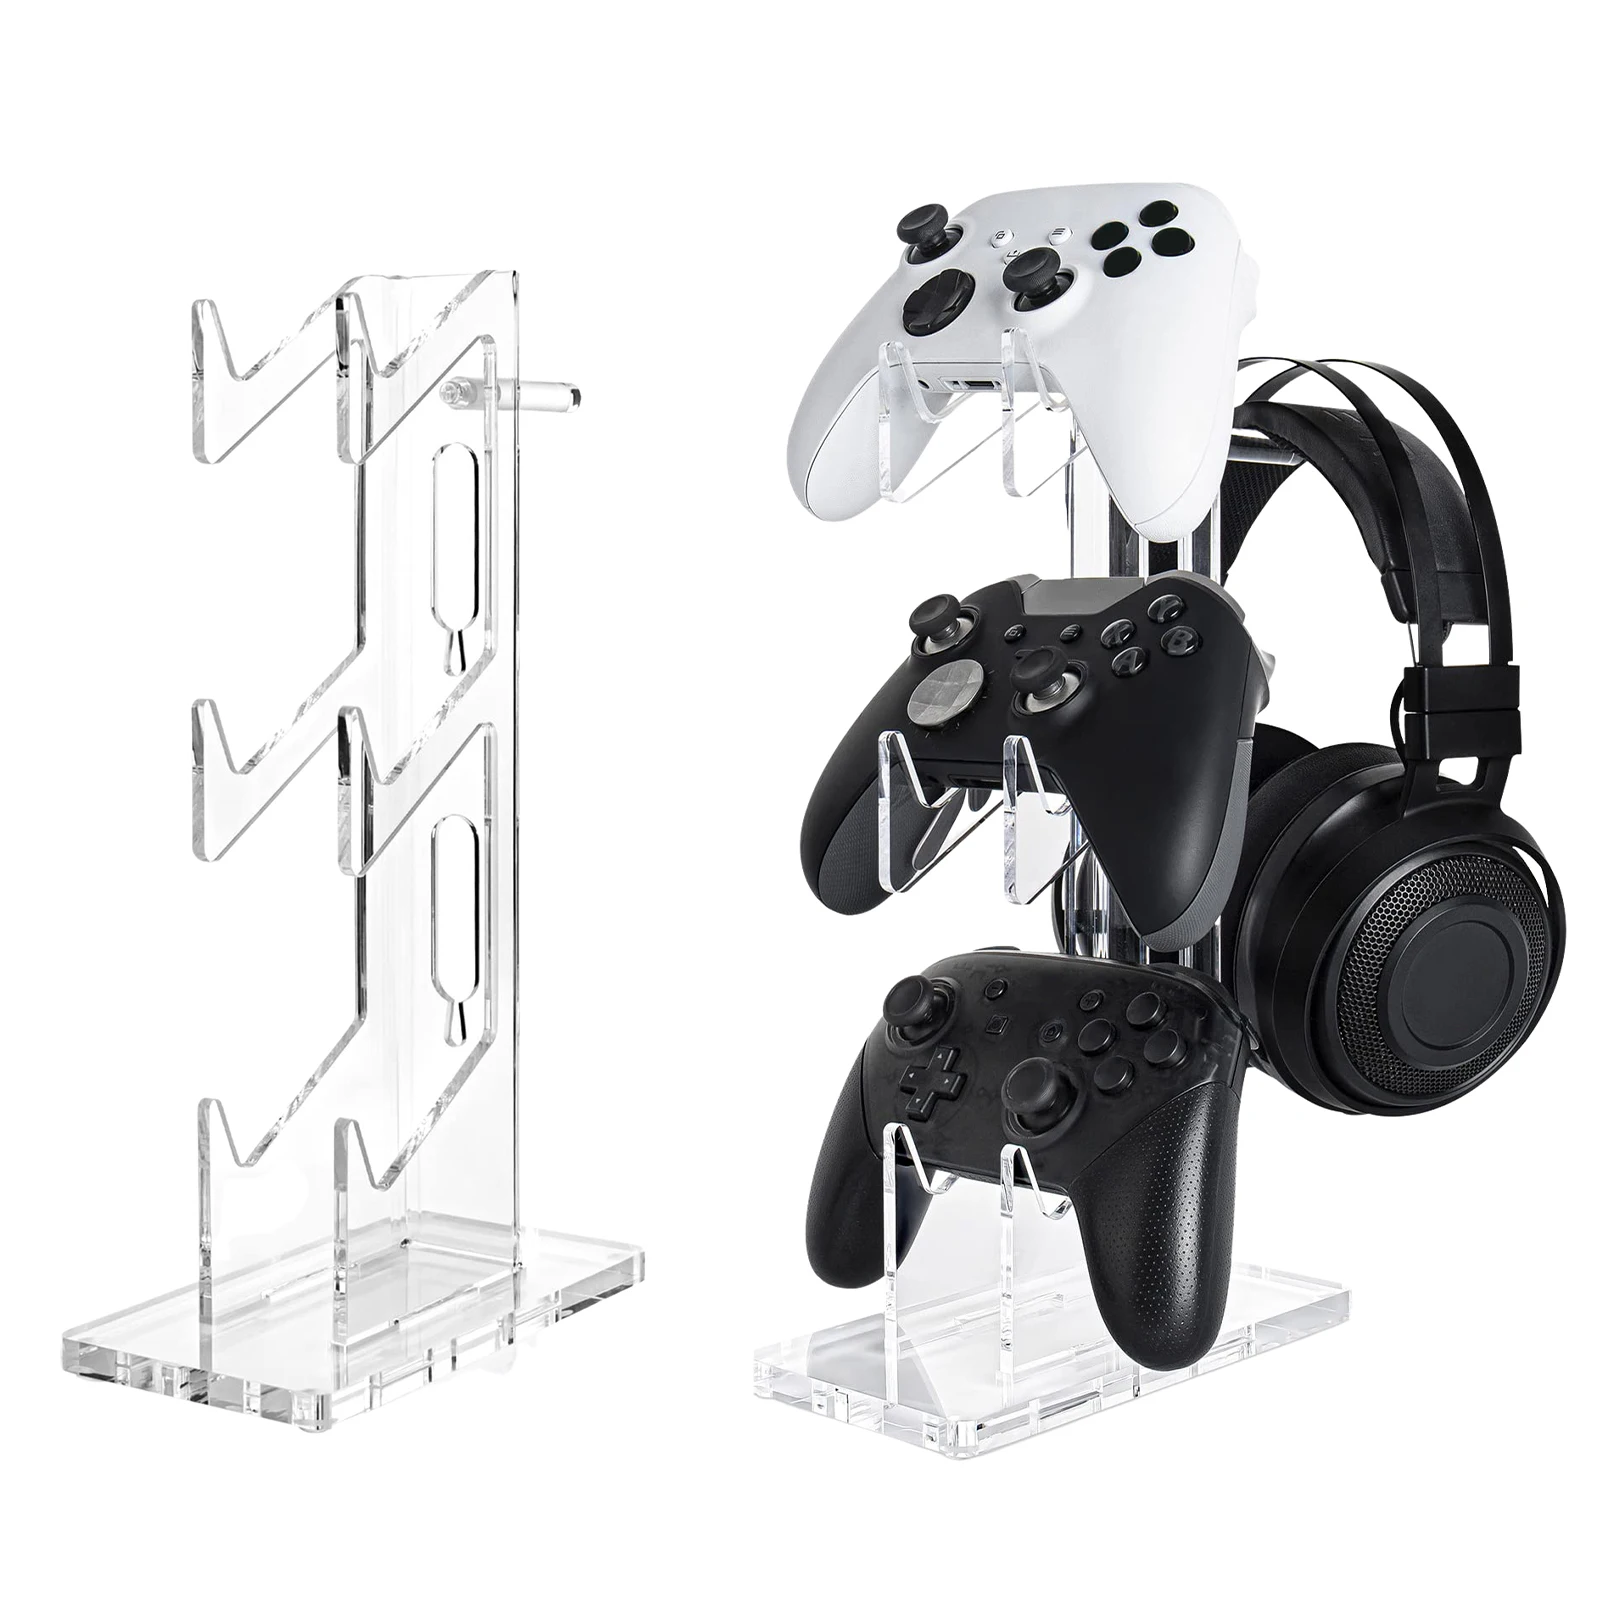 3 Tier Game Handle Desk Display Stand For Xbox Switch PS4 PS5 Acrylic Games Controller Headset Hanger Holder Accessories